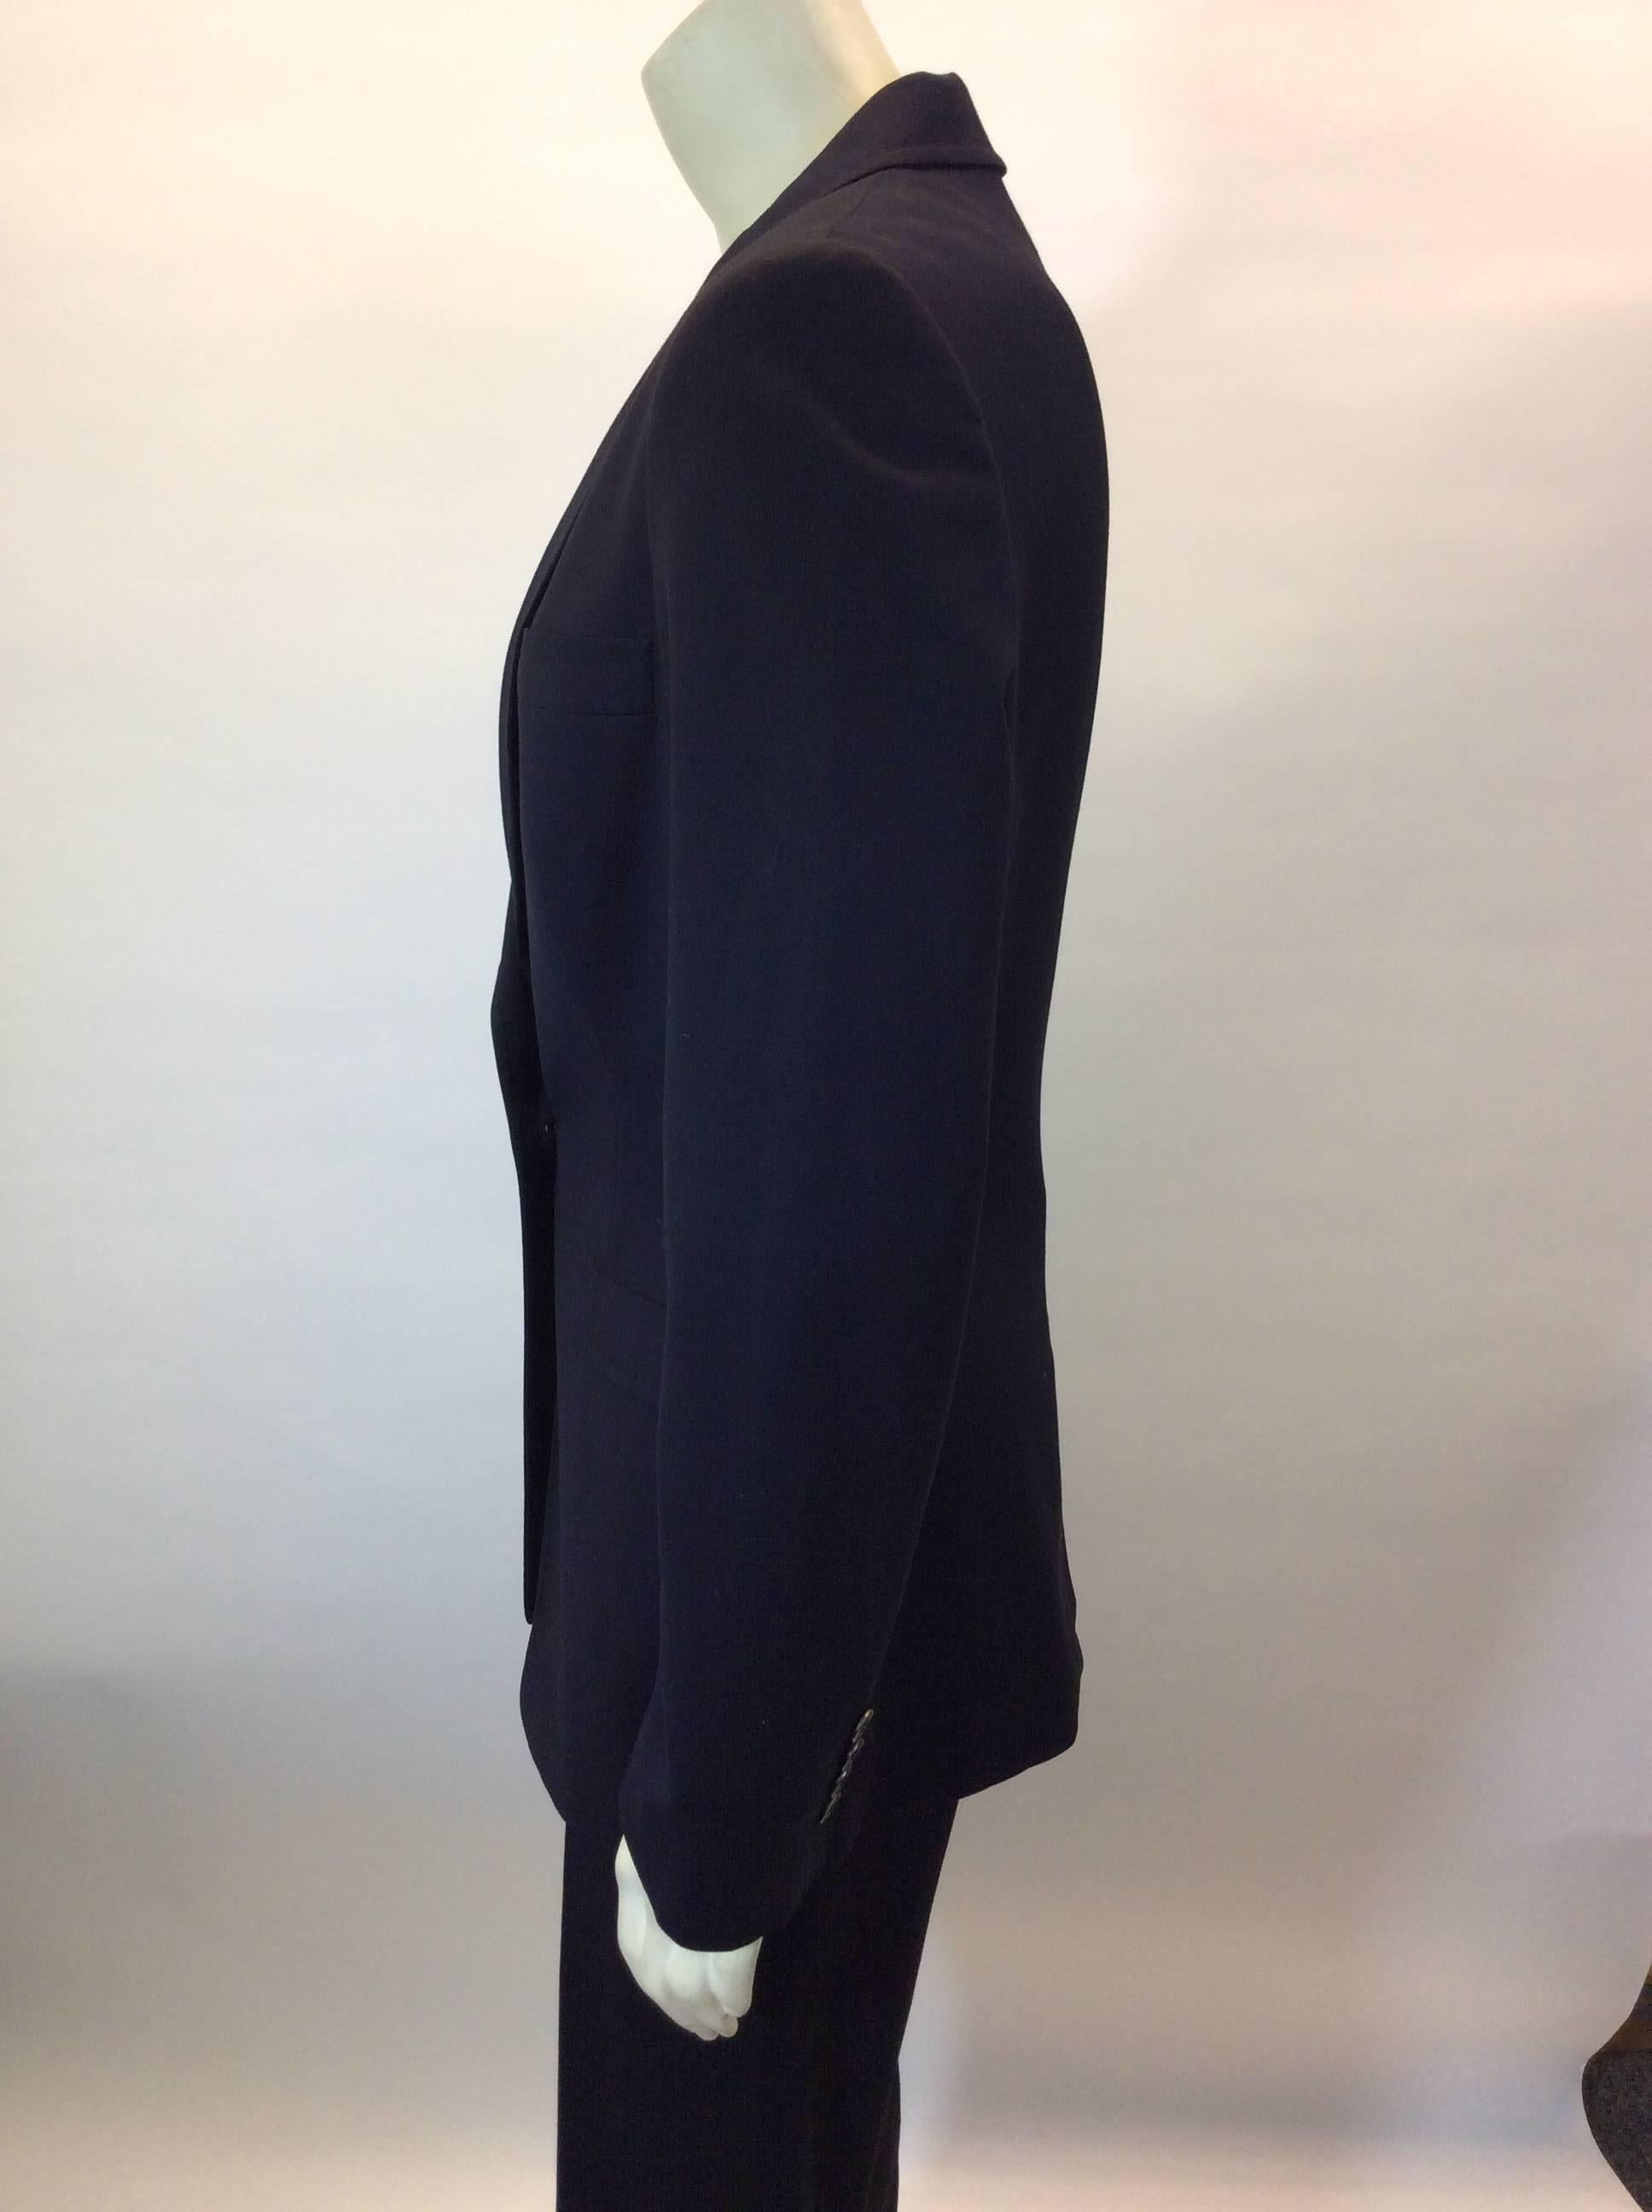 Dolce & Gabbana Navy Pantsuit with One Button Blazer In Excellent Condition For Sale In Narberth, PA